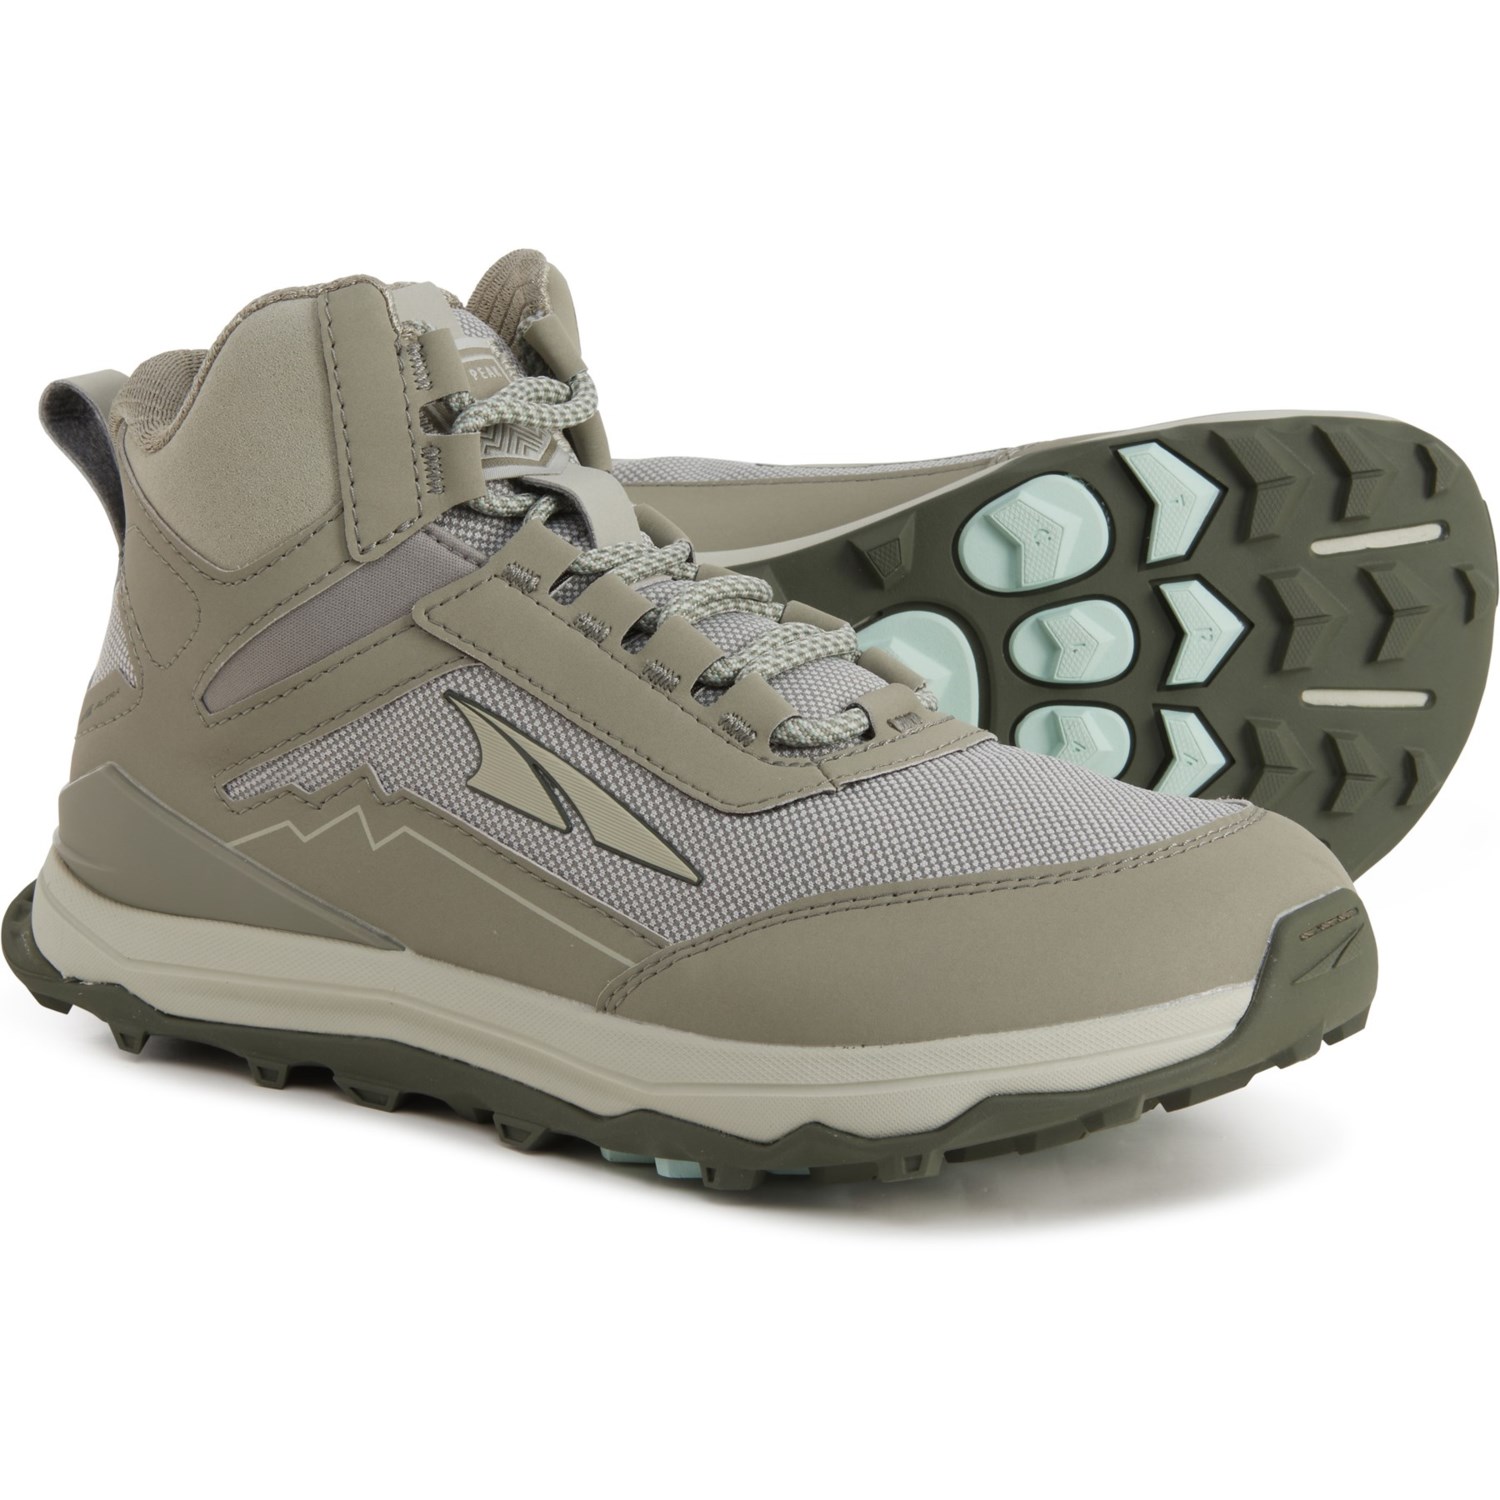 Altra Lone Peak Hiking Boots (For Women) - Save 40%